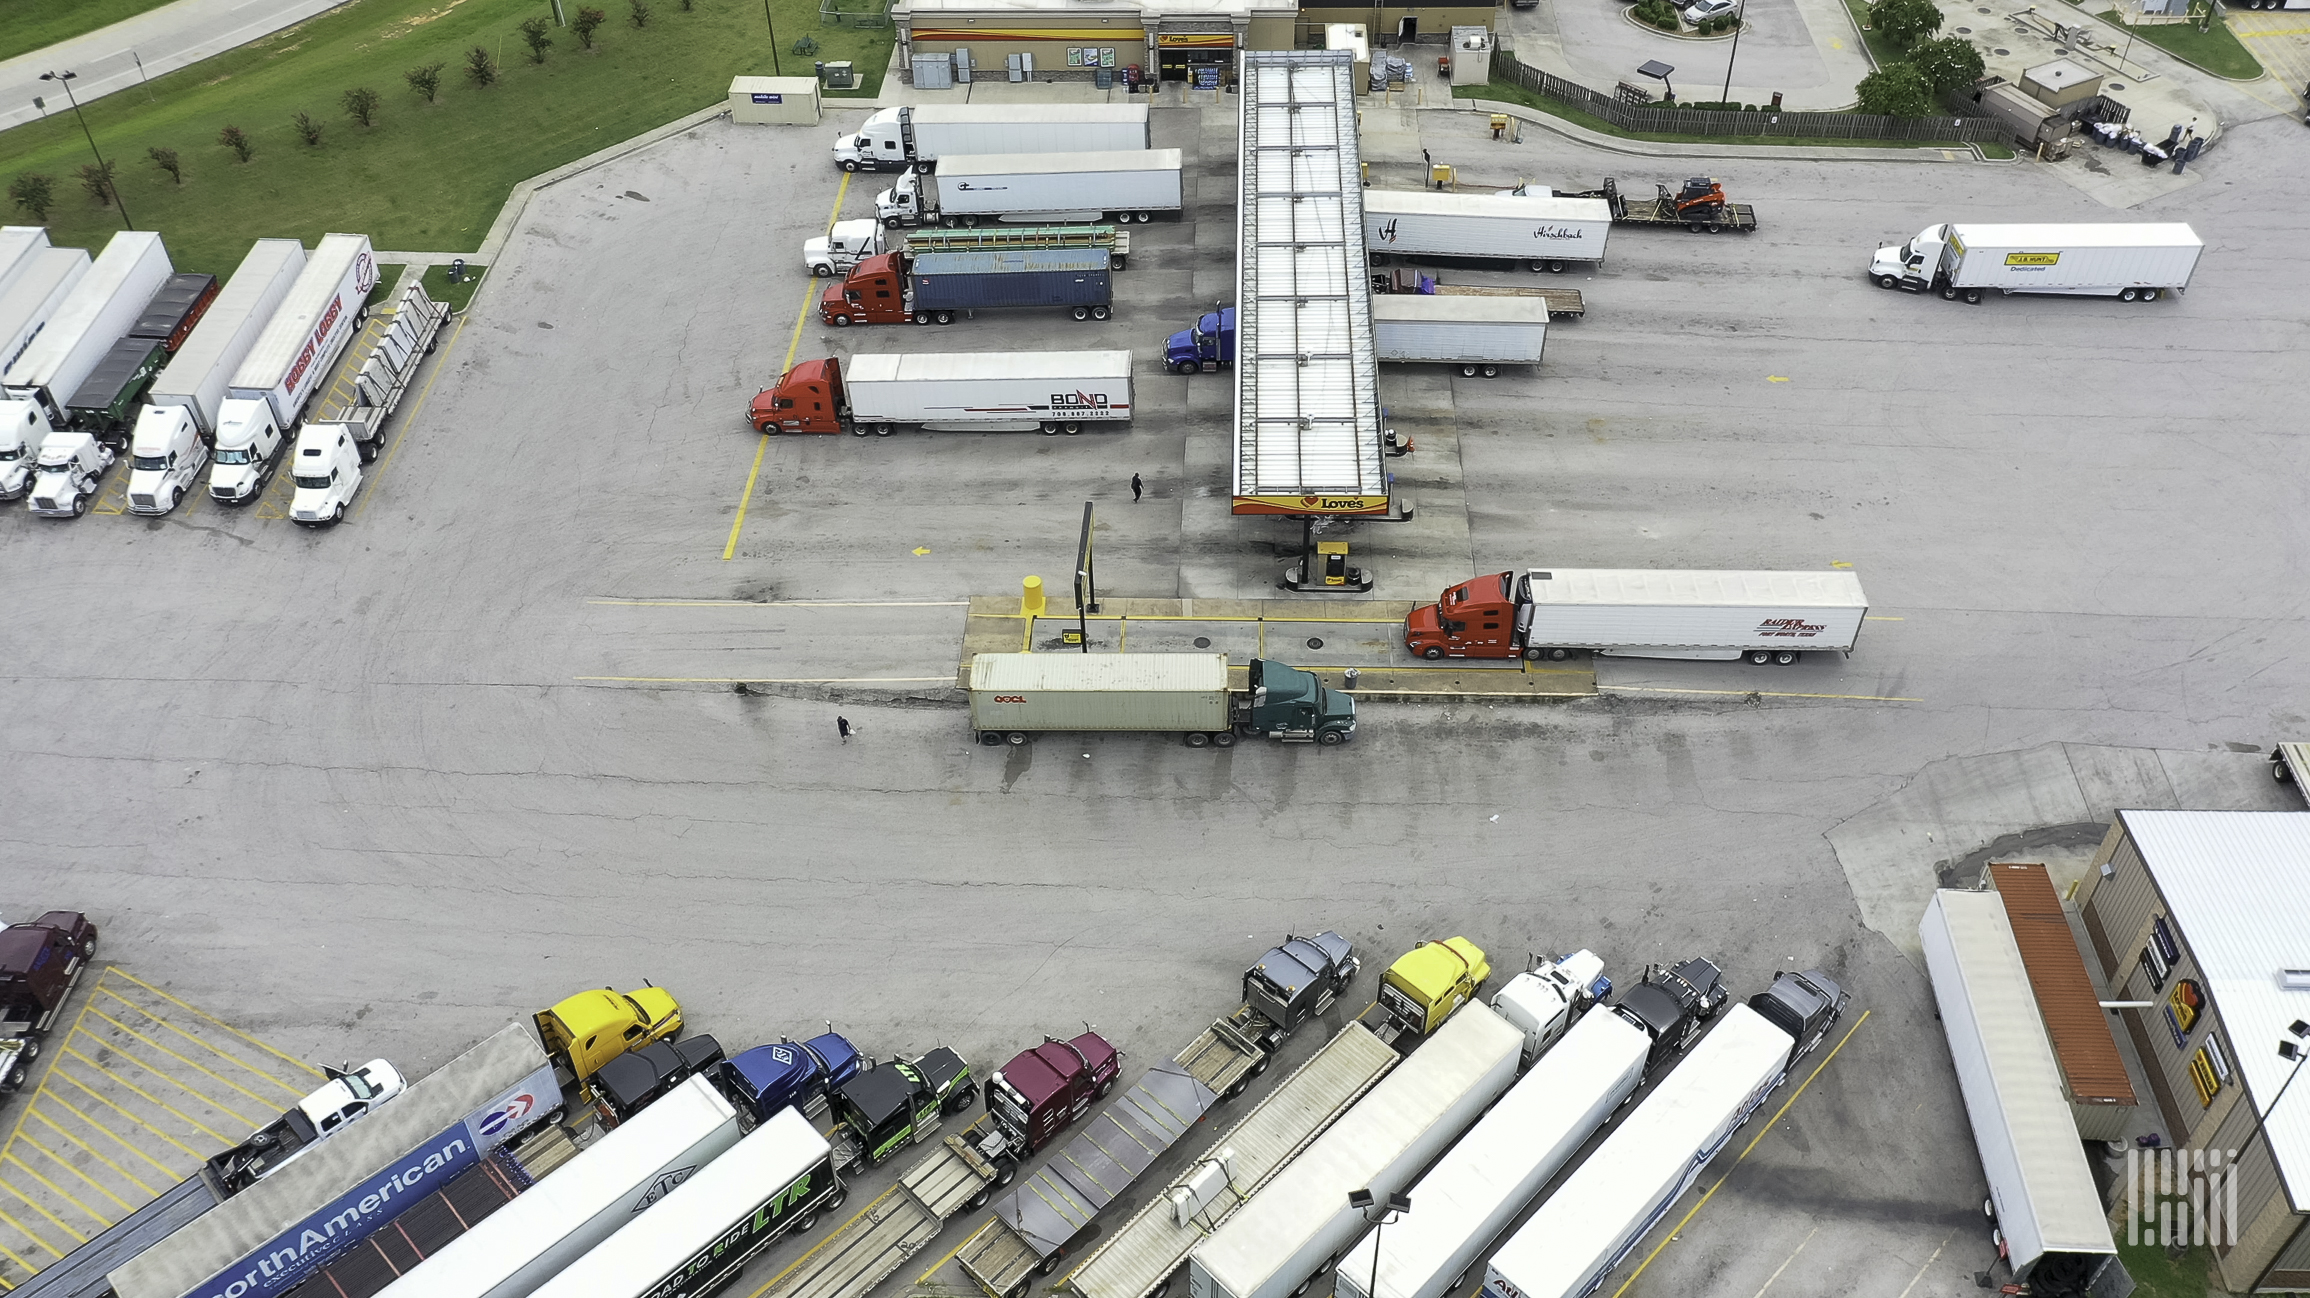 What You Need to Know - HOS Changes Final Rule - Len Dubois Trucking